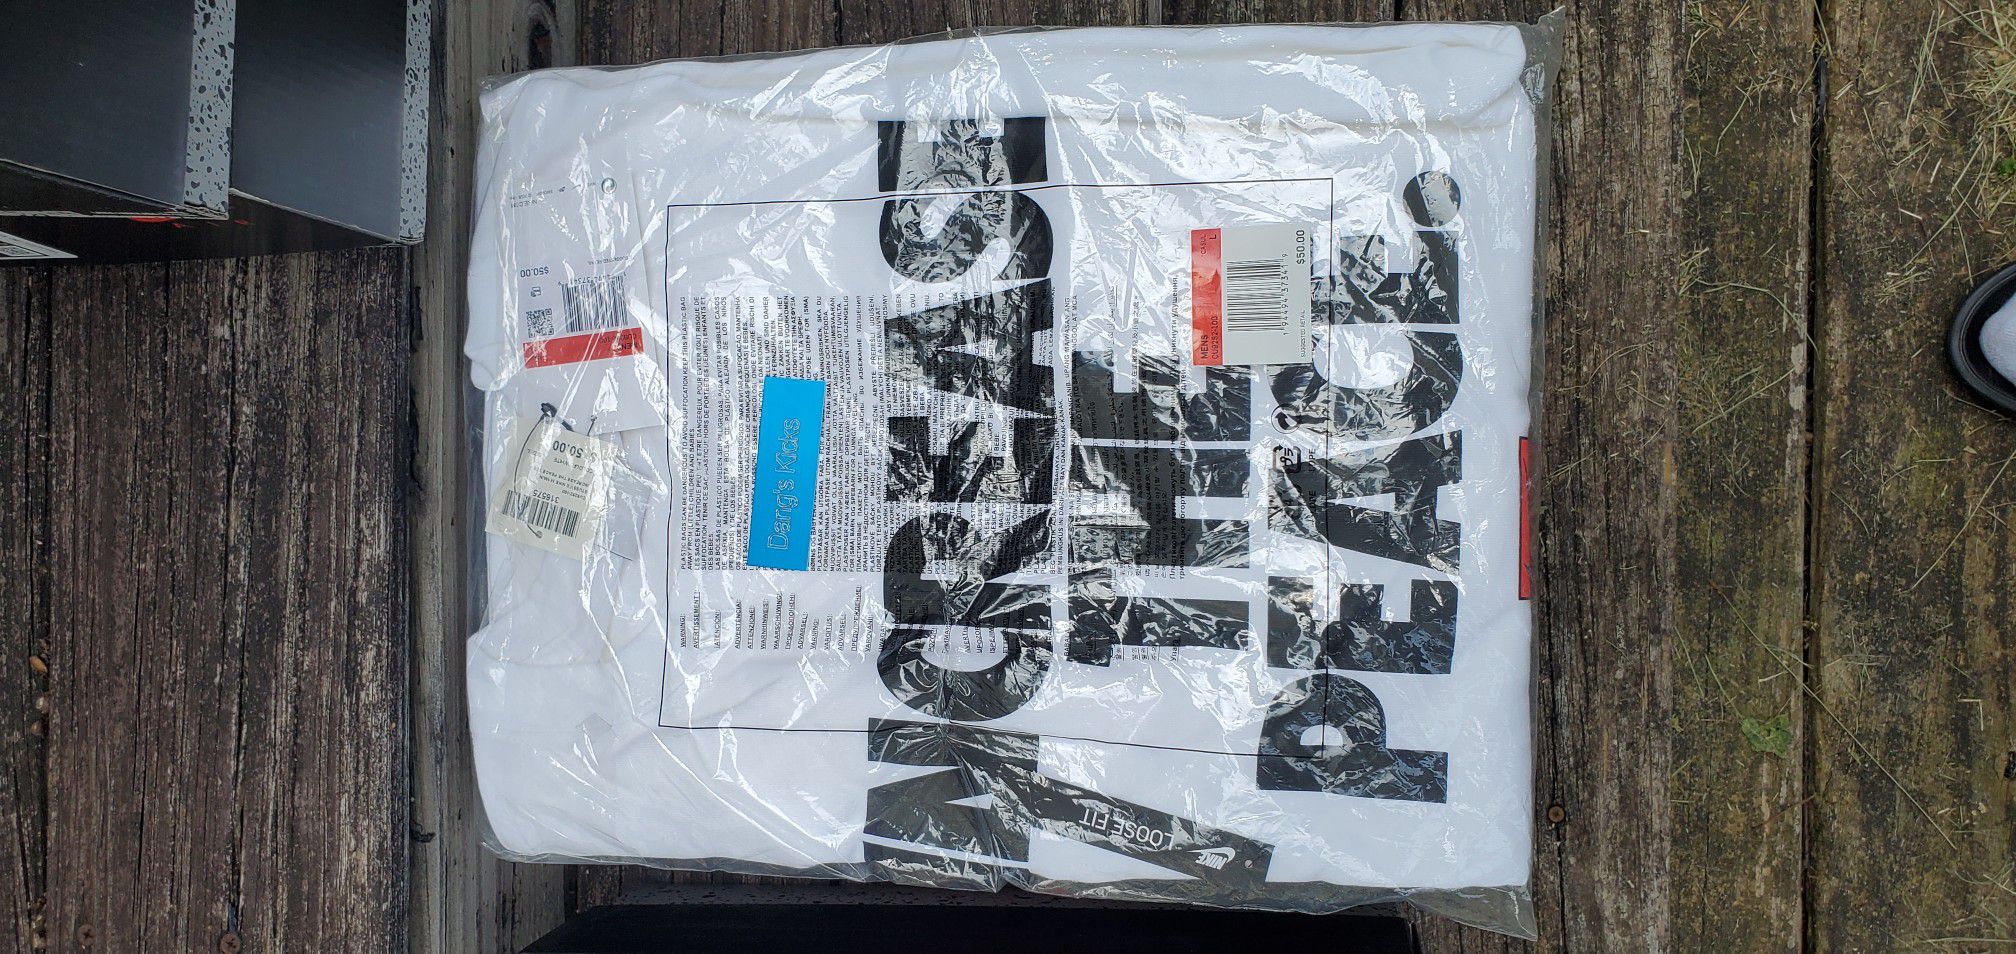 Nike x Stussy "Increase the peace" New Large